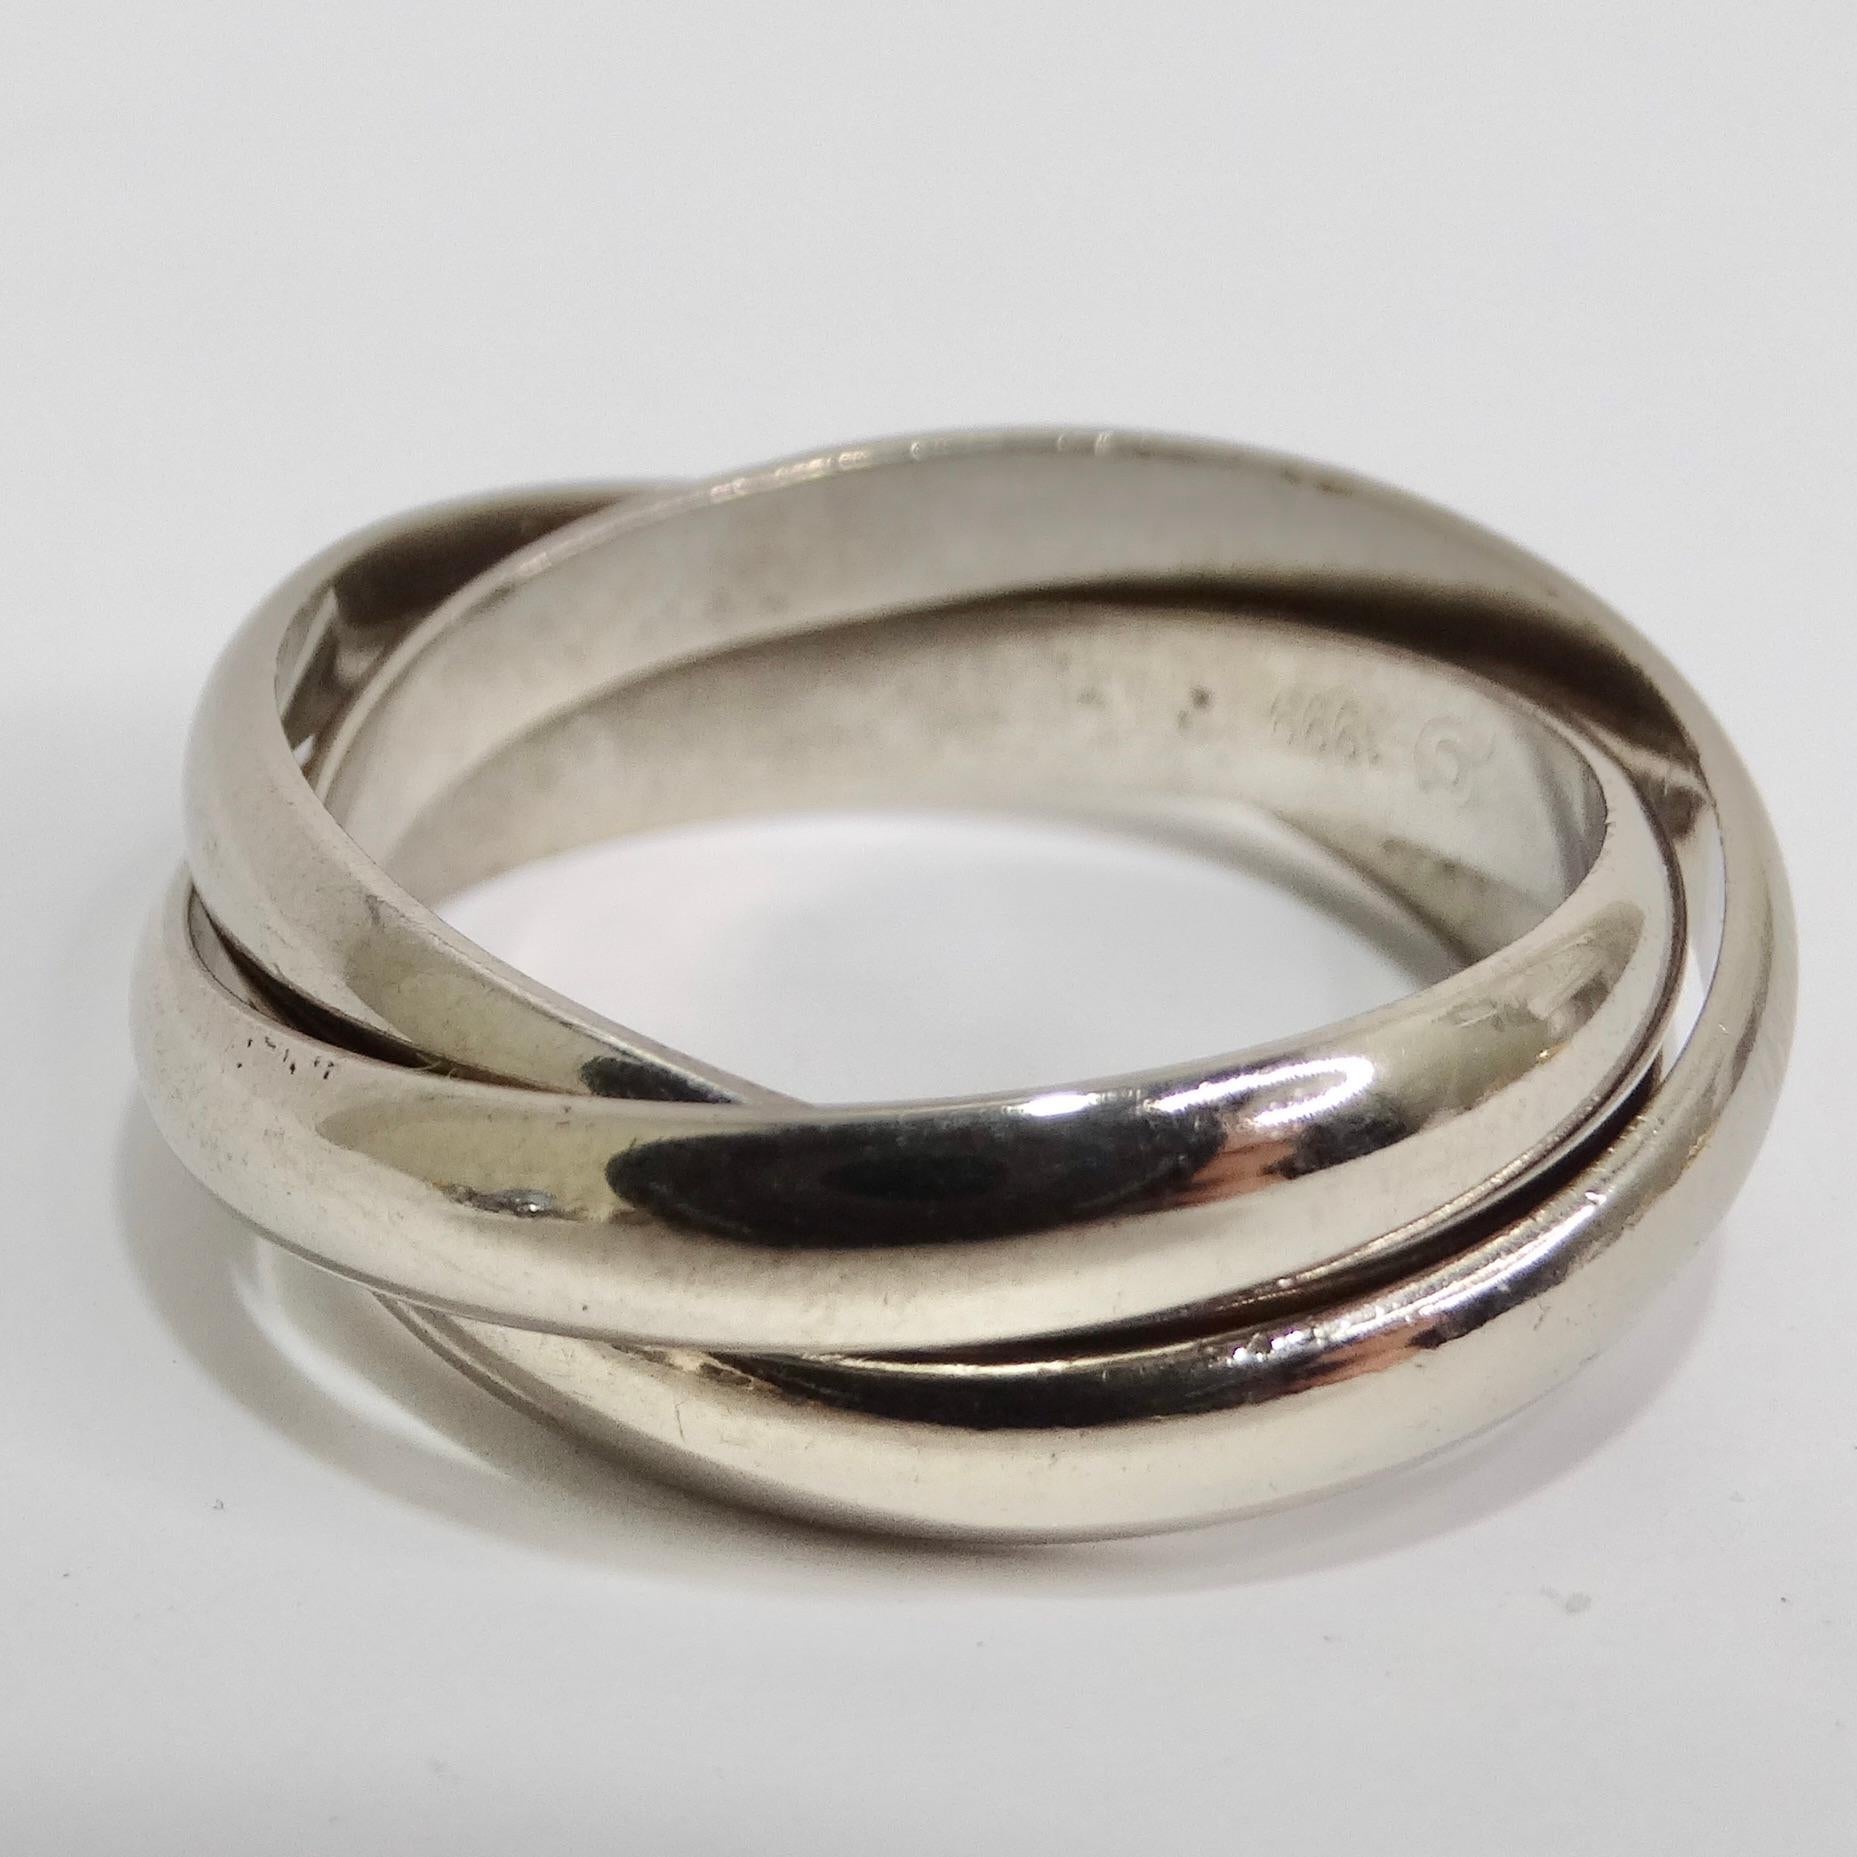 Cartier 18K White Gold Trinity Ring In Good Condition For Sale In Scottsdale, AZ